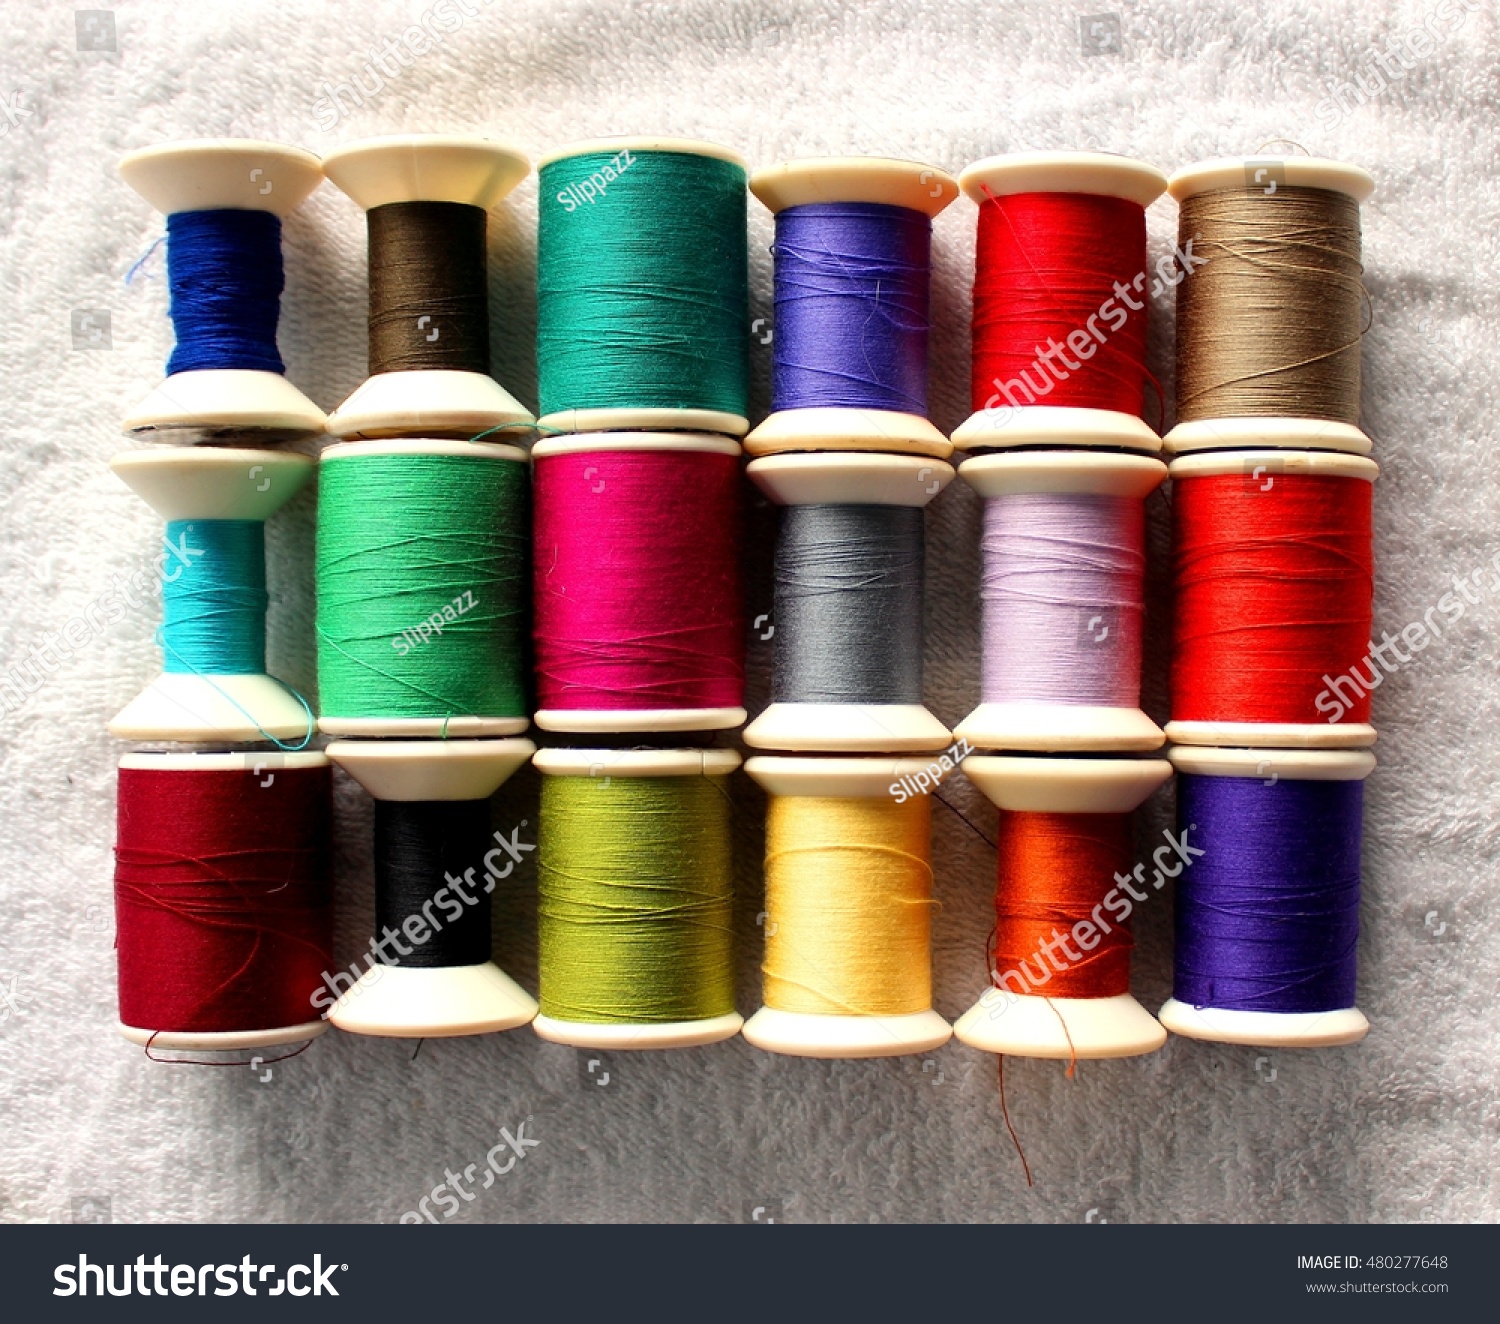 Reel Colorful Thread On White Towel Stock Photo (Royalty Free ...